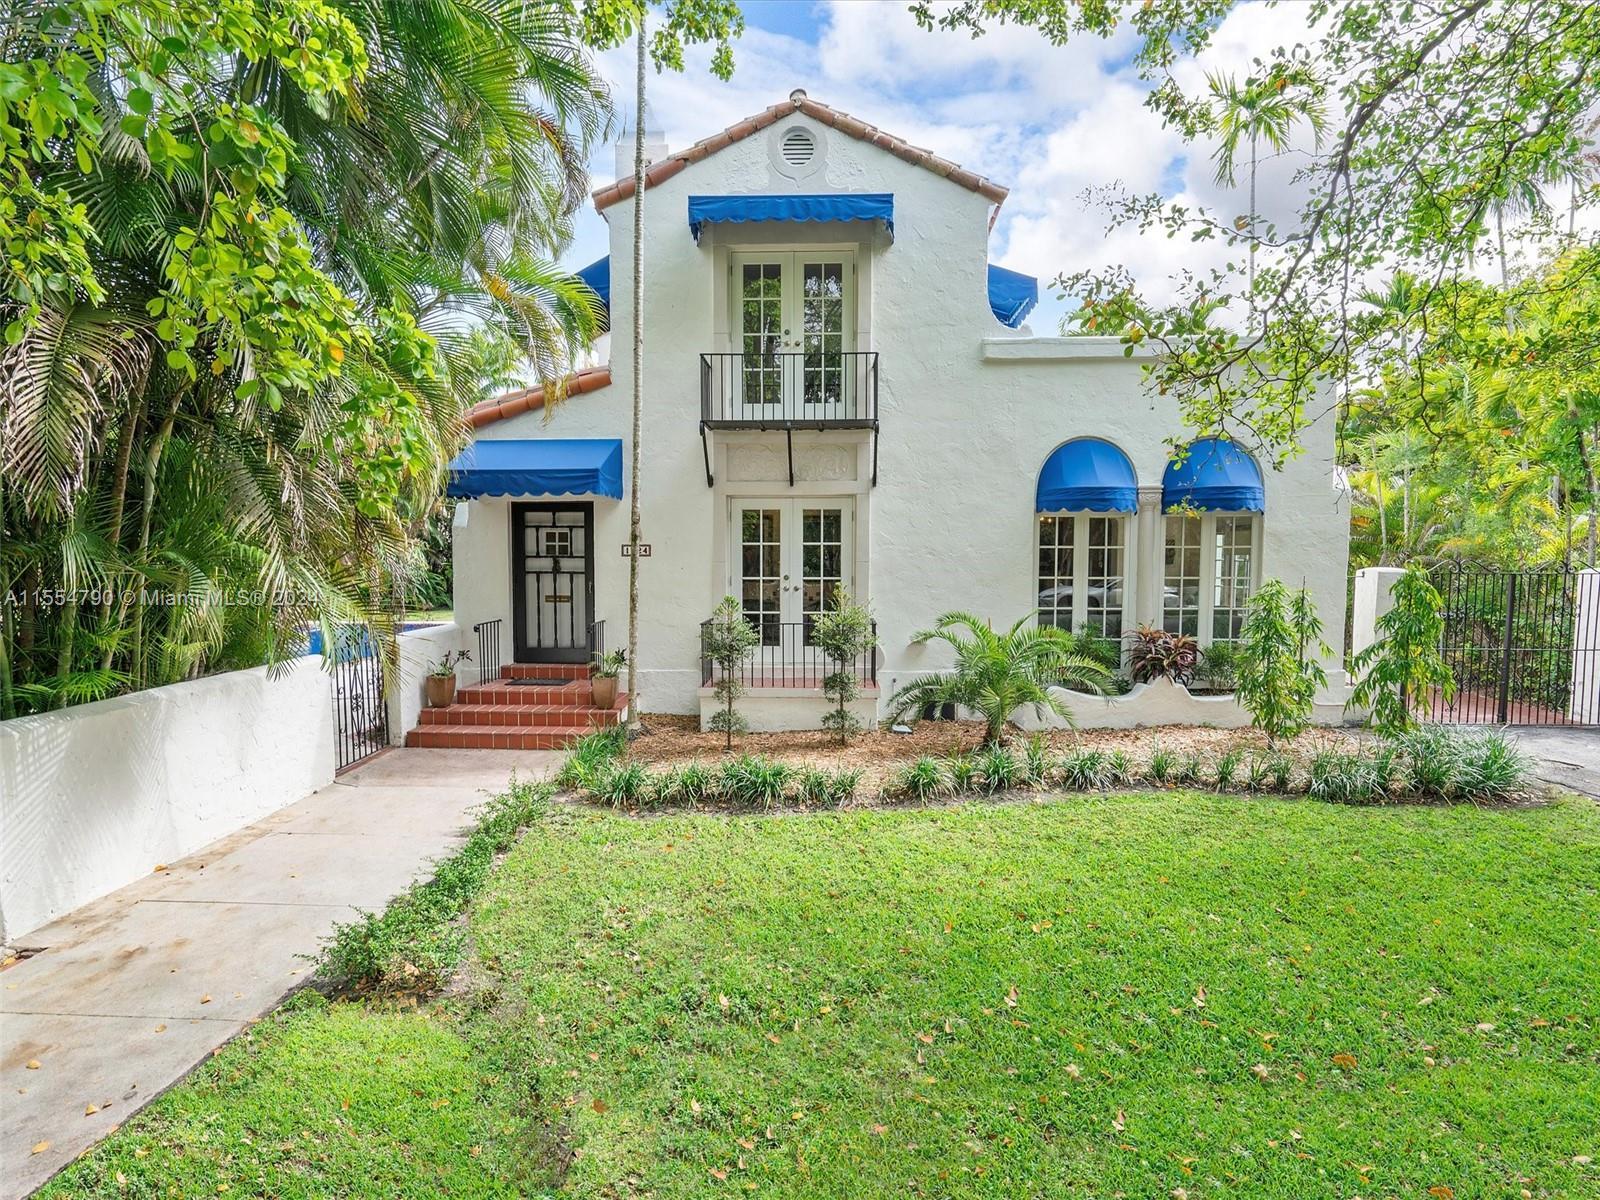 Photo of 1024 Asturia Ave in Coral Gables, FL